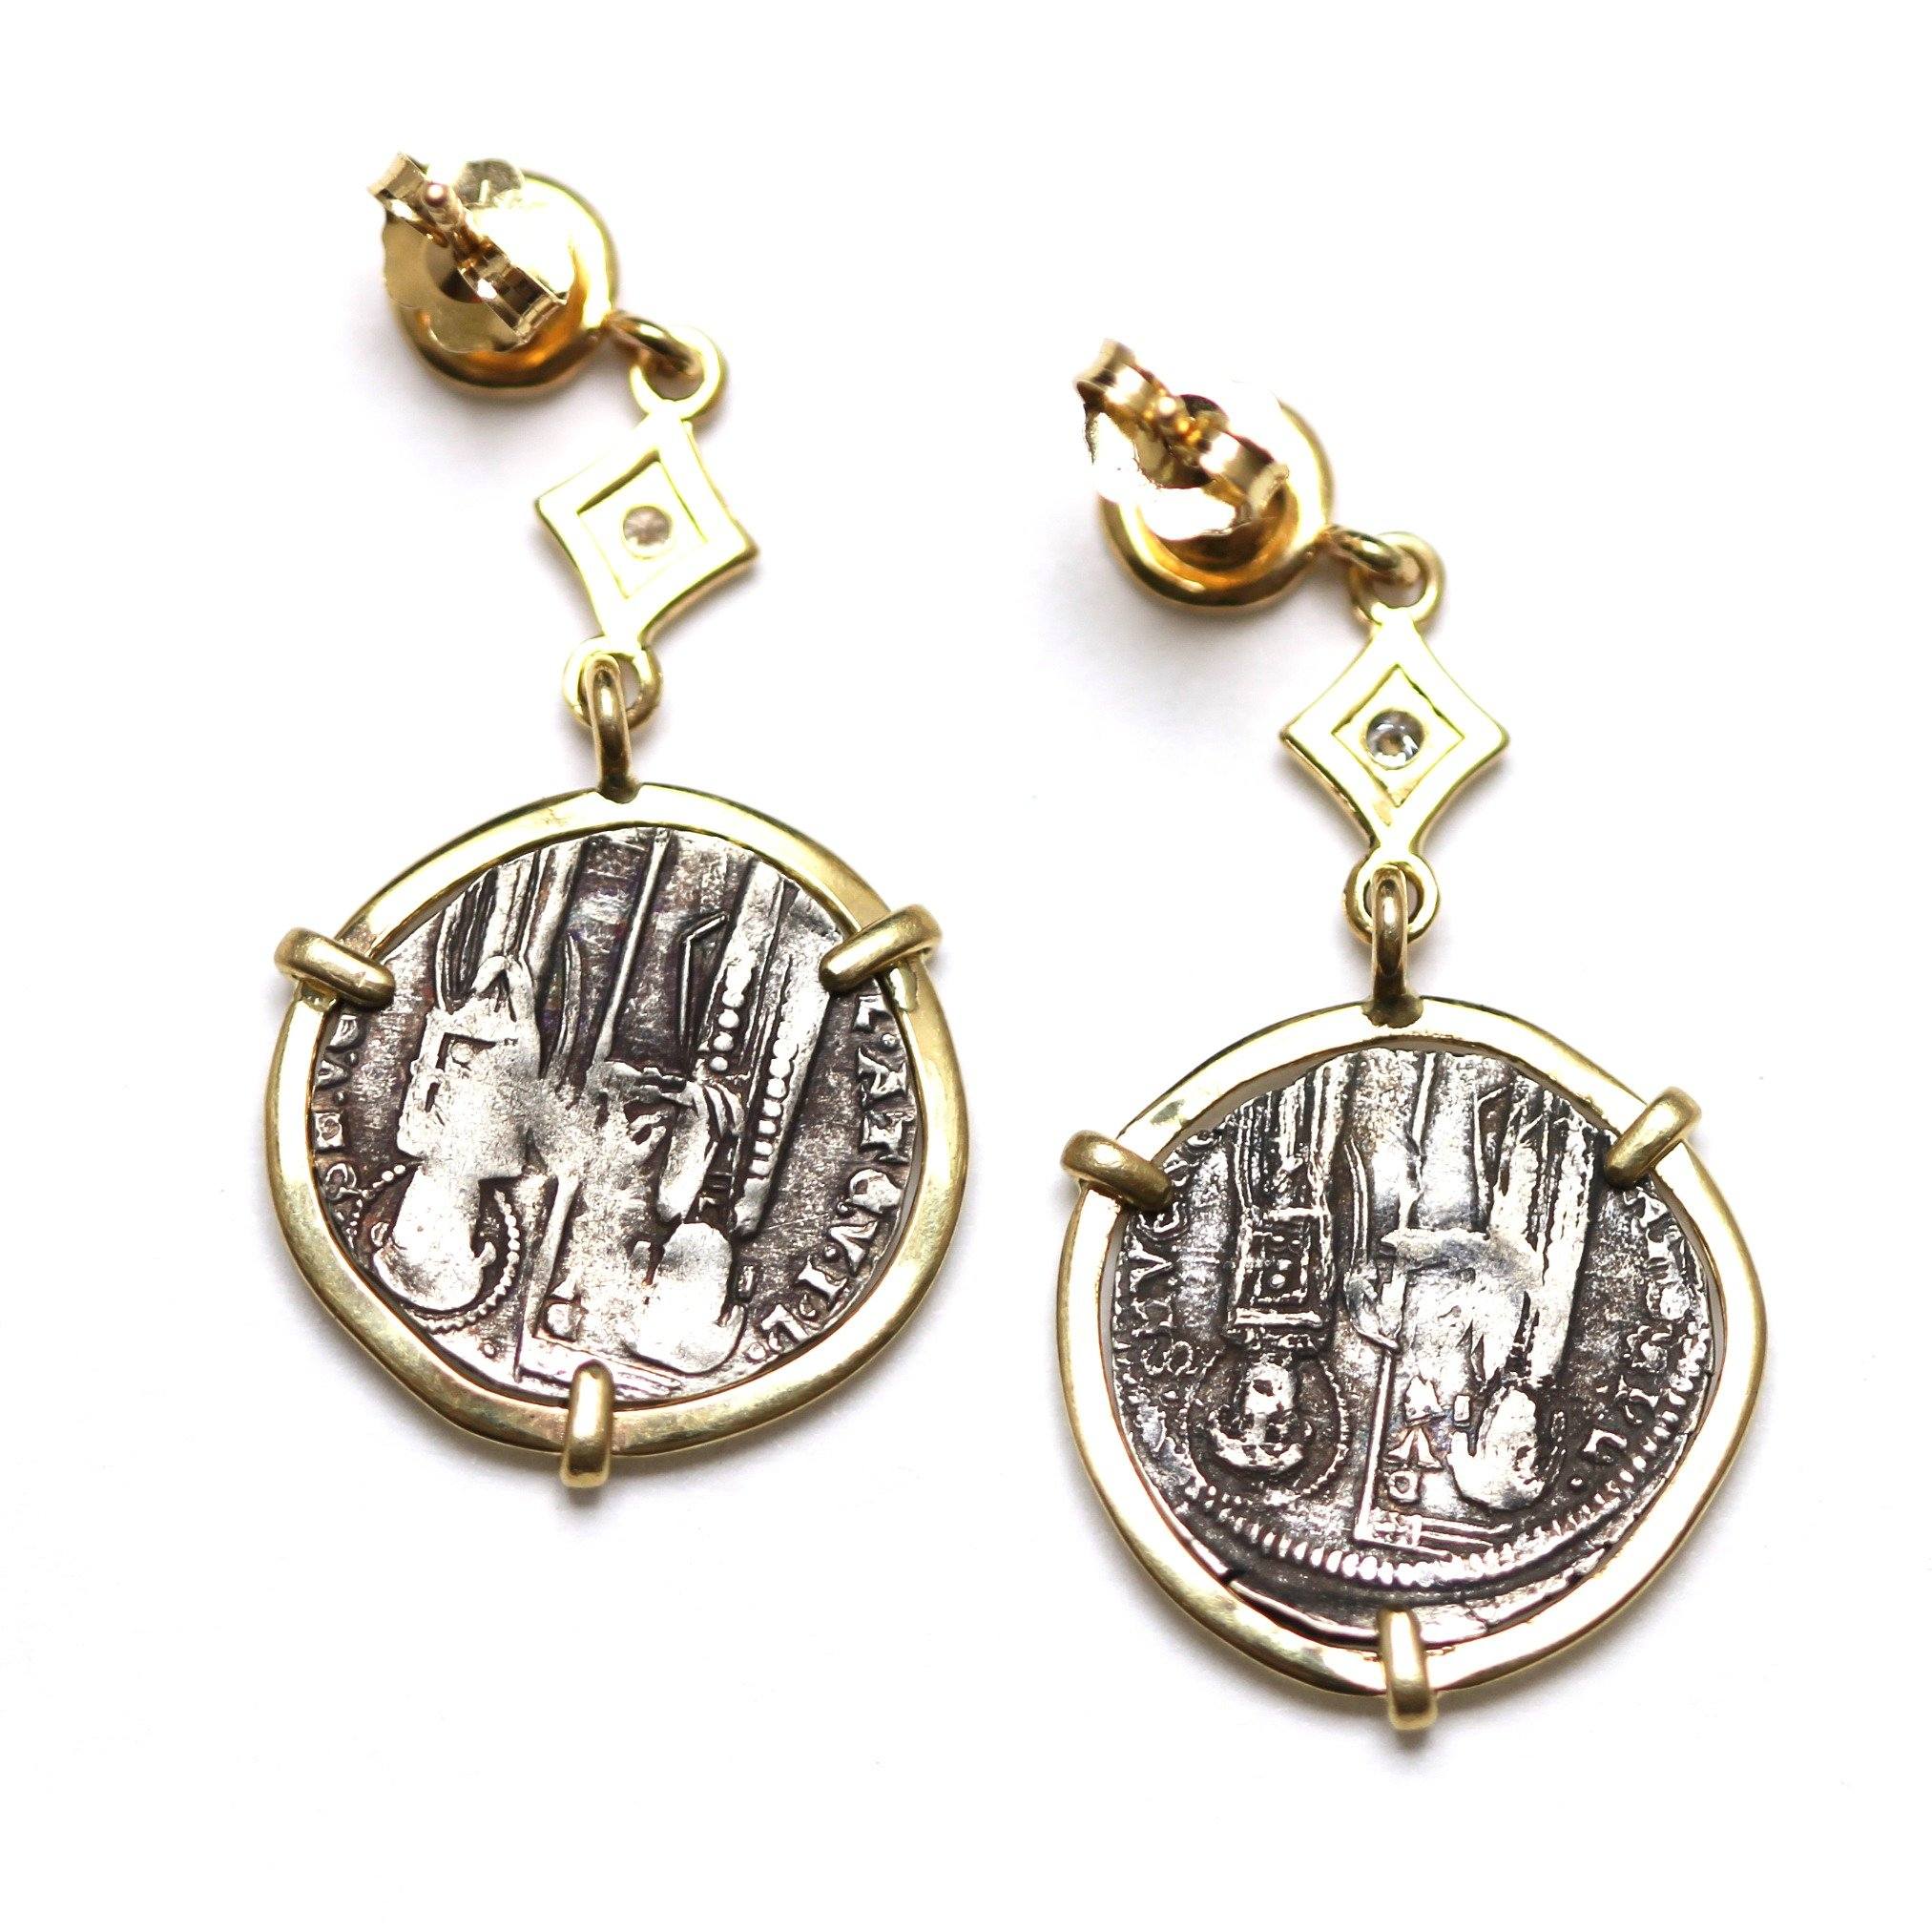 14K Gold Earrings, 0.08 CT Diamond Accents, Venetian Grosso, Ancient Coin Earrings, ID13000 - Erez Ancient Coin Jewelry 